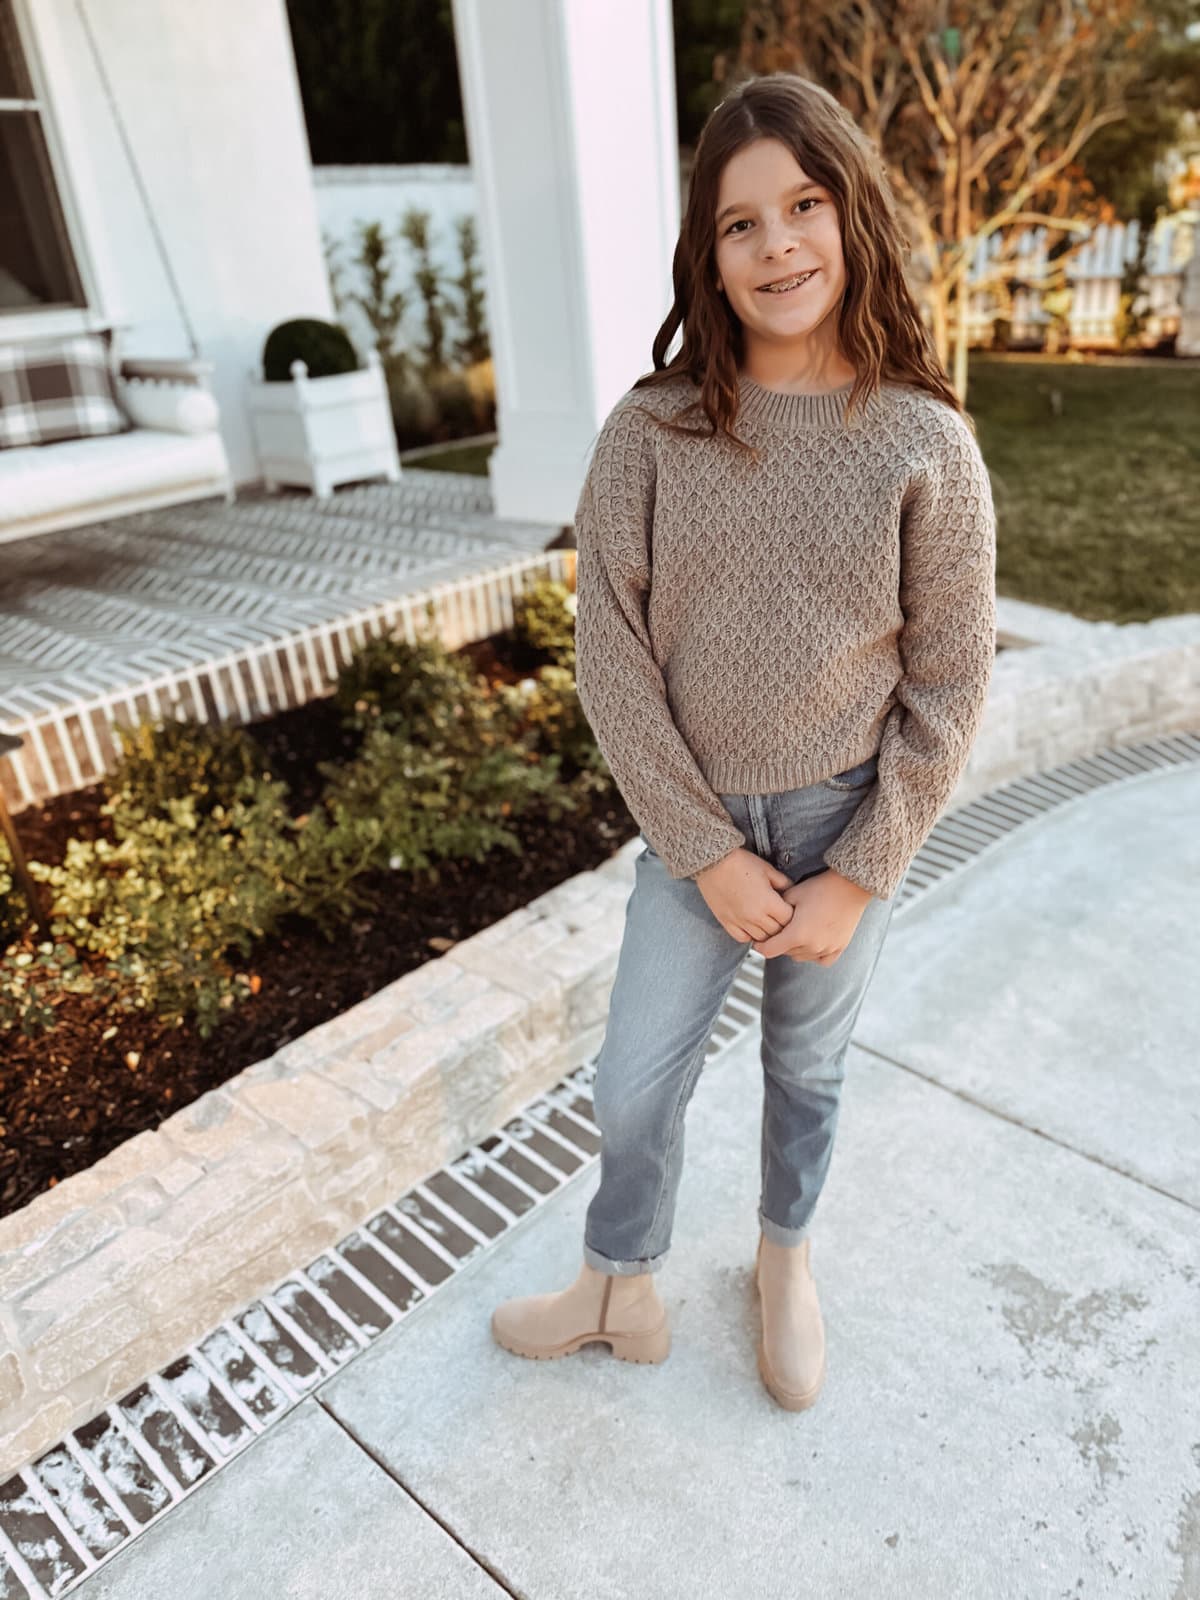 The best tween fashion finds you'll love too! - Mint Arrow